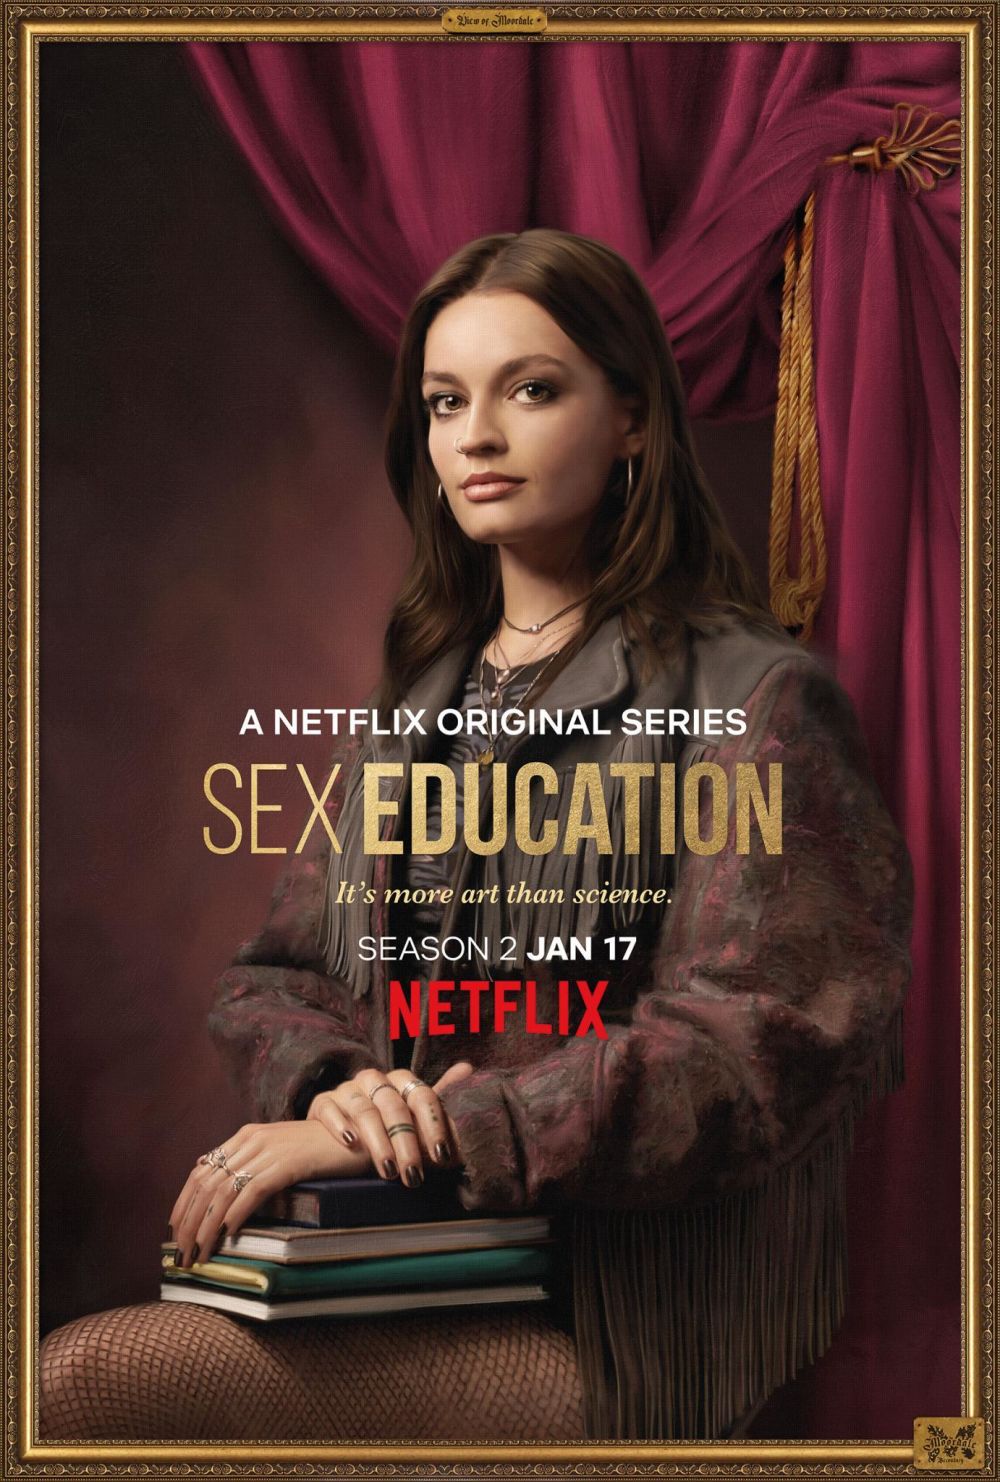 A promotional portrait of Maeve from the Netflix series, Sex Education, holding books.